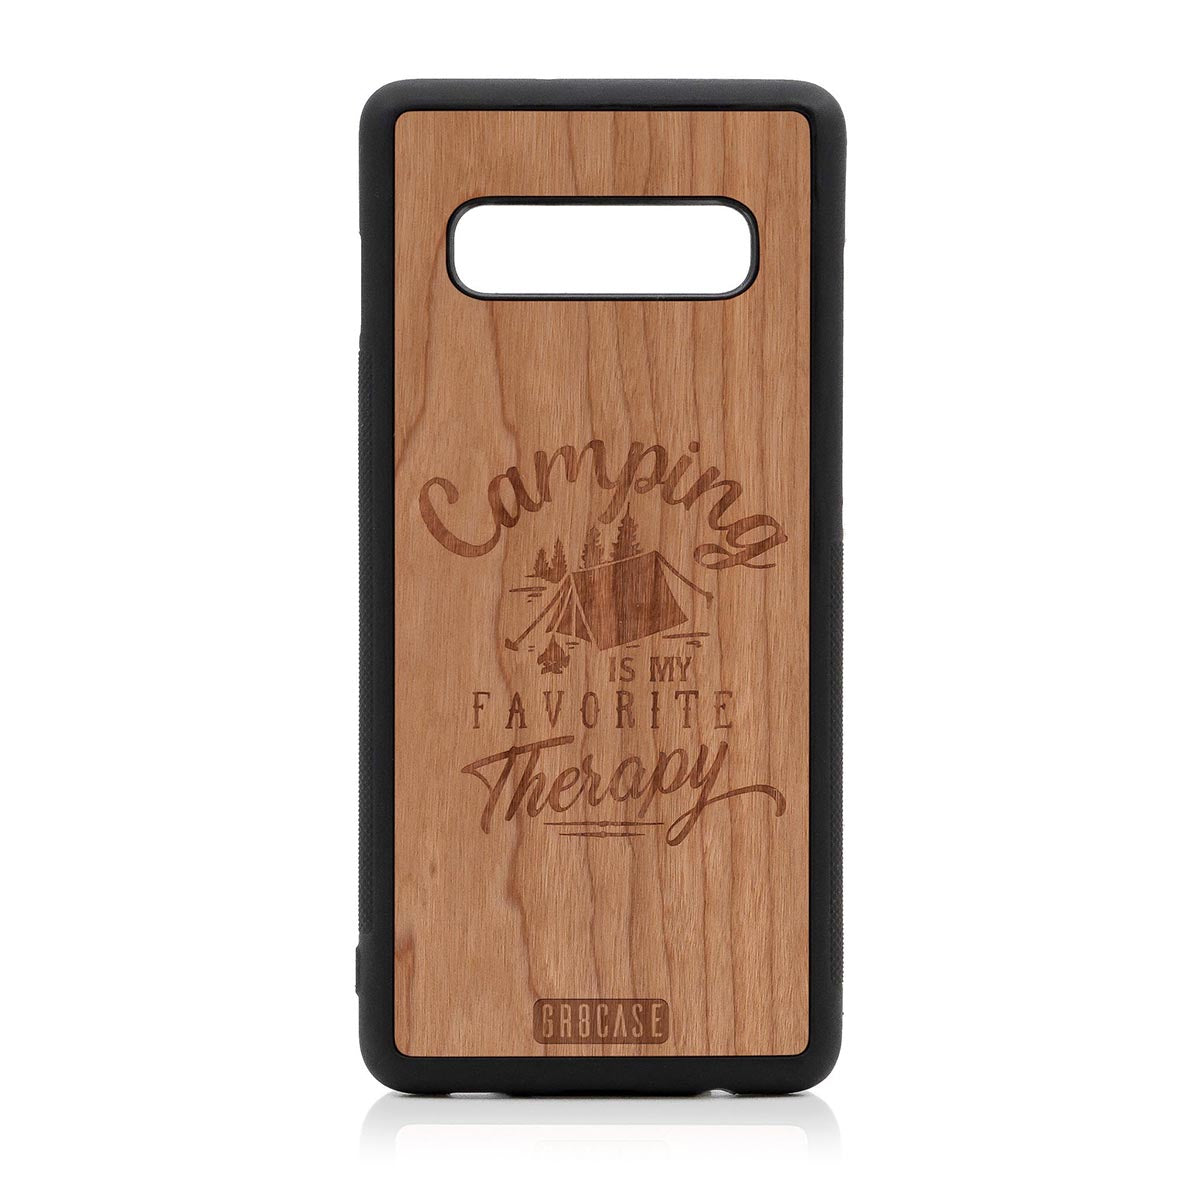 Camping Is My Favorite Therapy Design Wood Case For Samsung Galaxy S10 Plus by GR8CASE